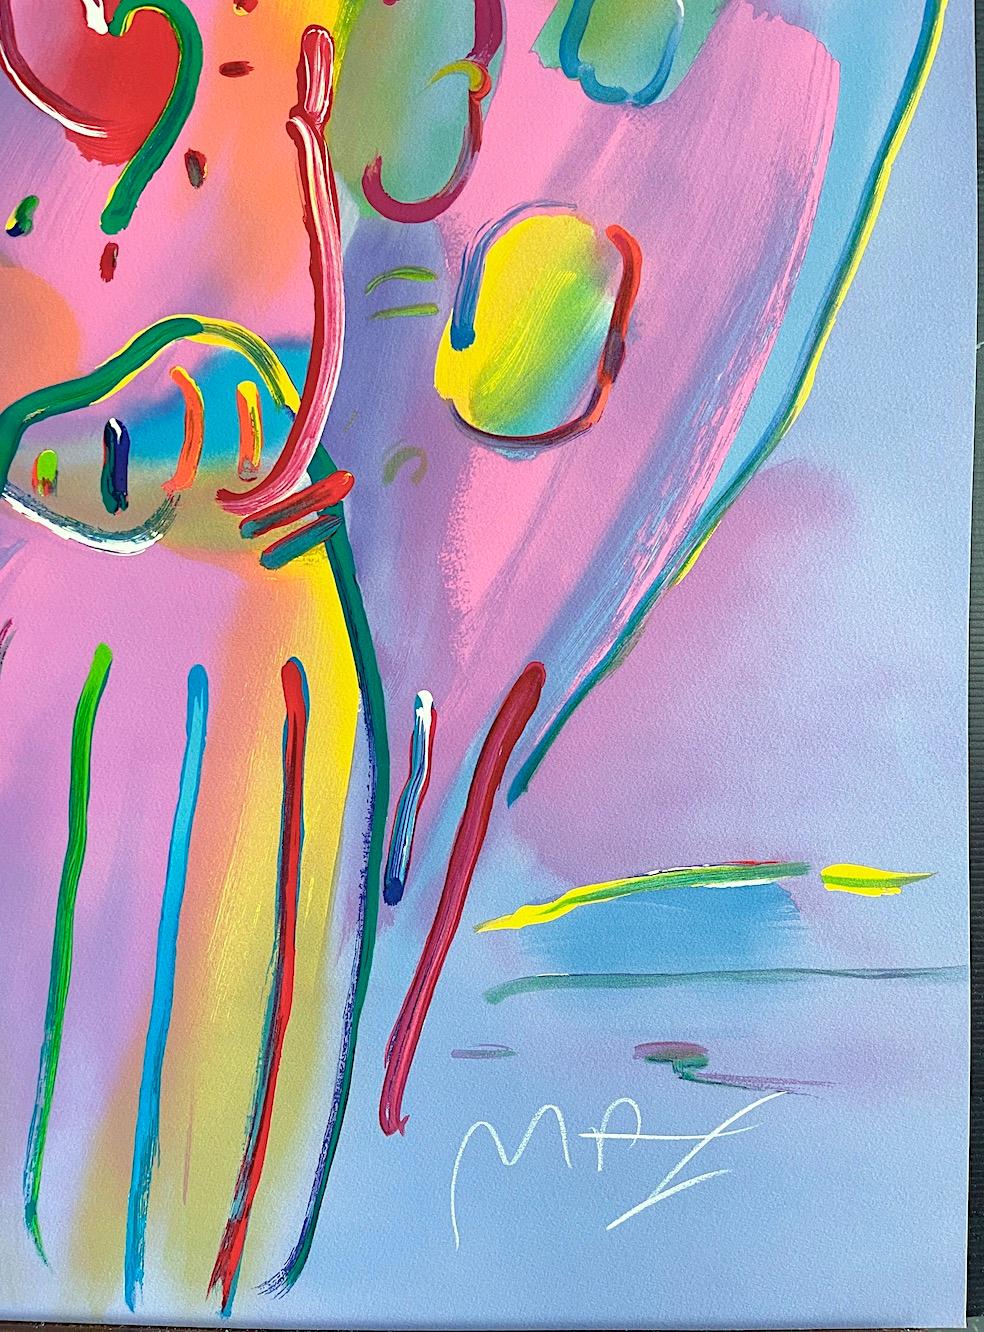 ANGEL WITH HEART Signed Lithograph, Guardian Angel, Red Heart, Rainbow Colors - Pop Art Print by Peter Max